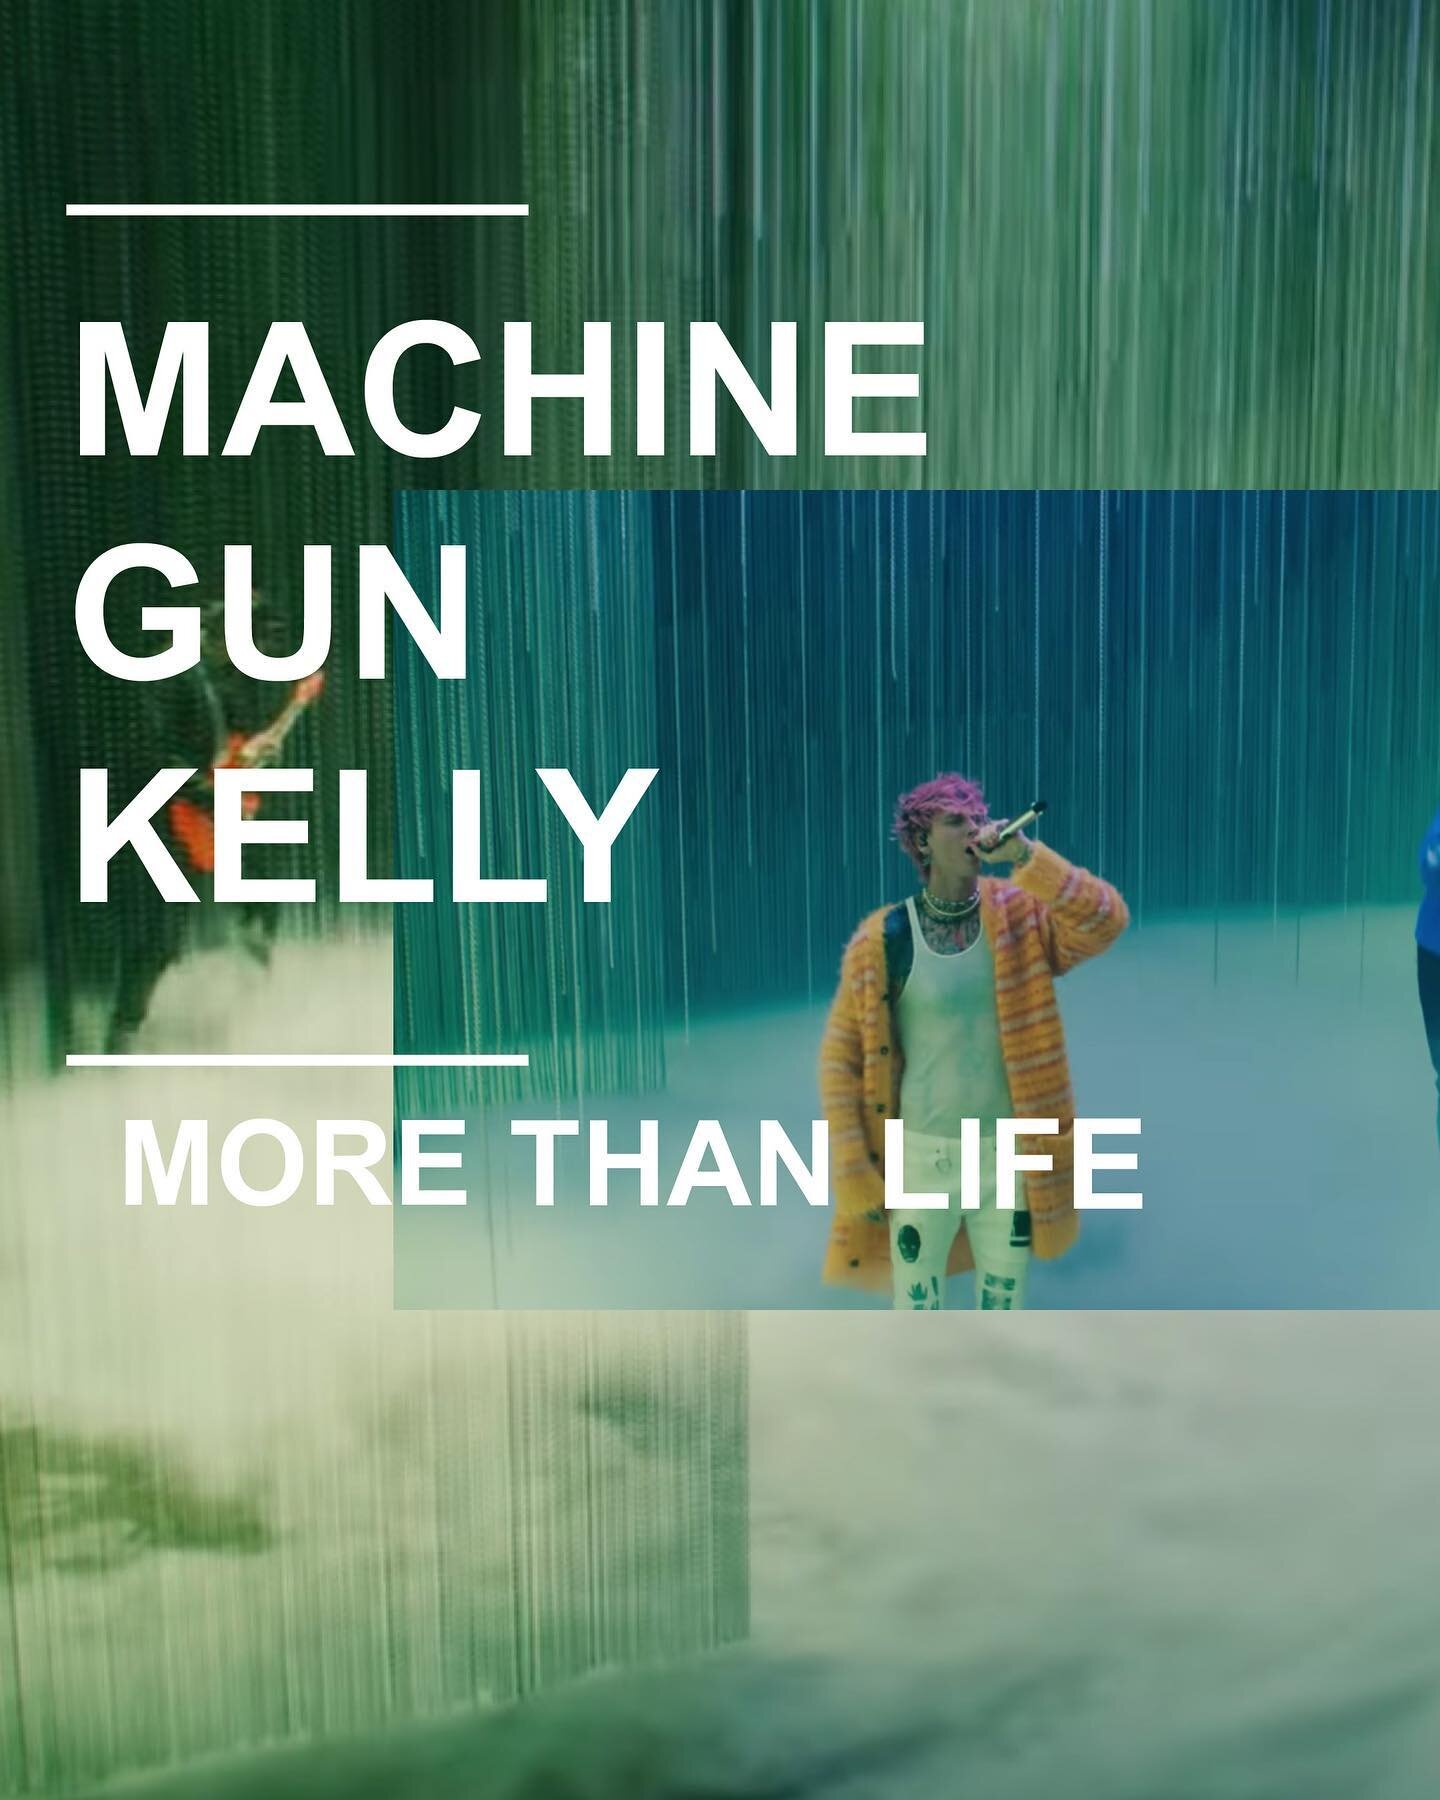 Machine Gun Kelly ft. Glaive- &ldquo;MORE THAN LIFE&rdquo; - Official Live Performance VEVO
&mdash;
PROJECT :: @machinegunkelly ft. @1glaive - &ldquo;more than life&rdquo; - Official Live Performance @VEVO
DATE :: April 2022
ROLE :: Design, Drawings,